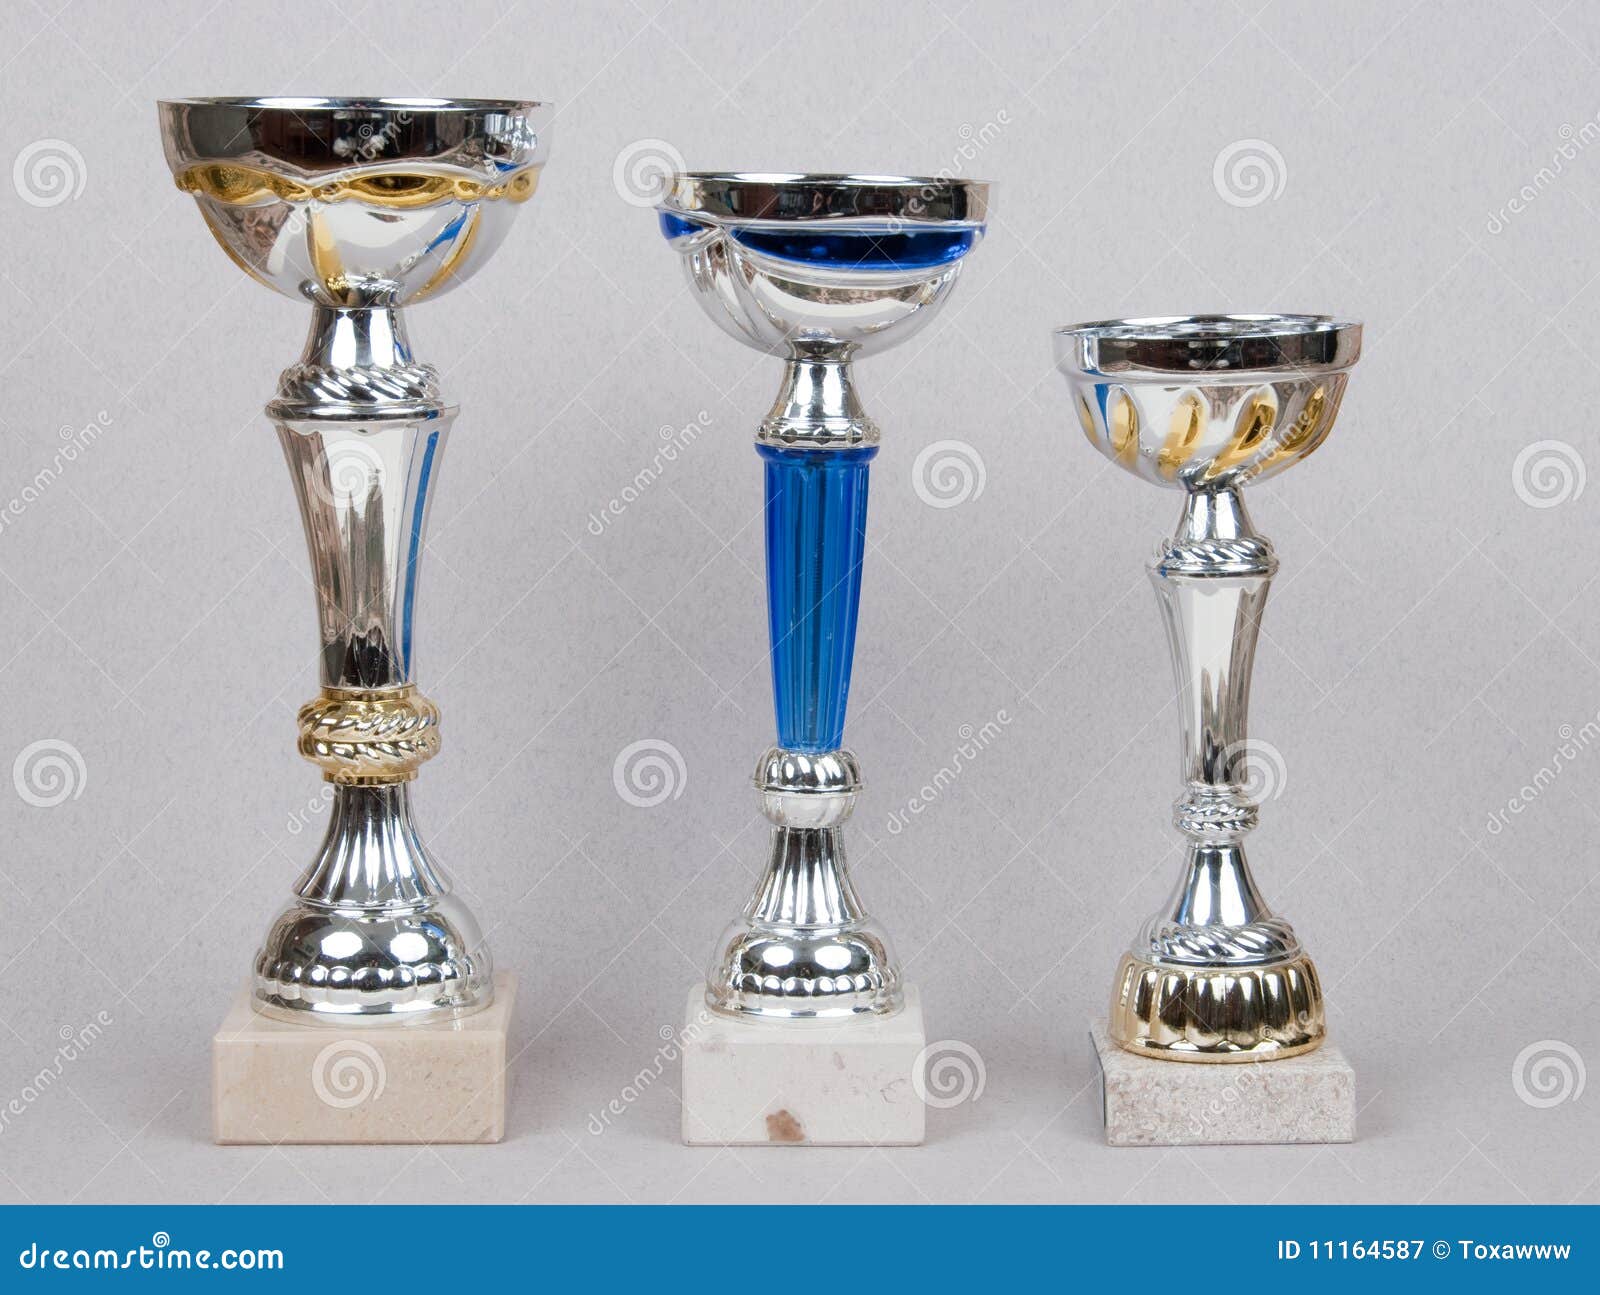 three prize cup